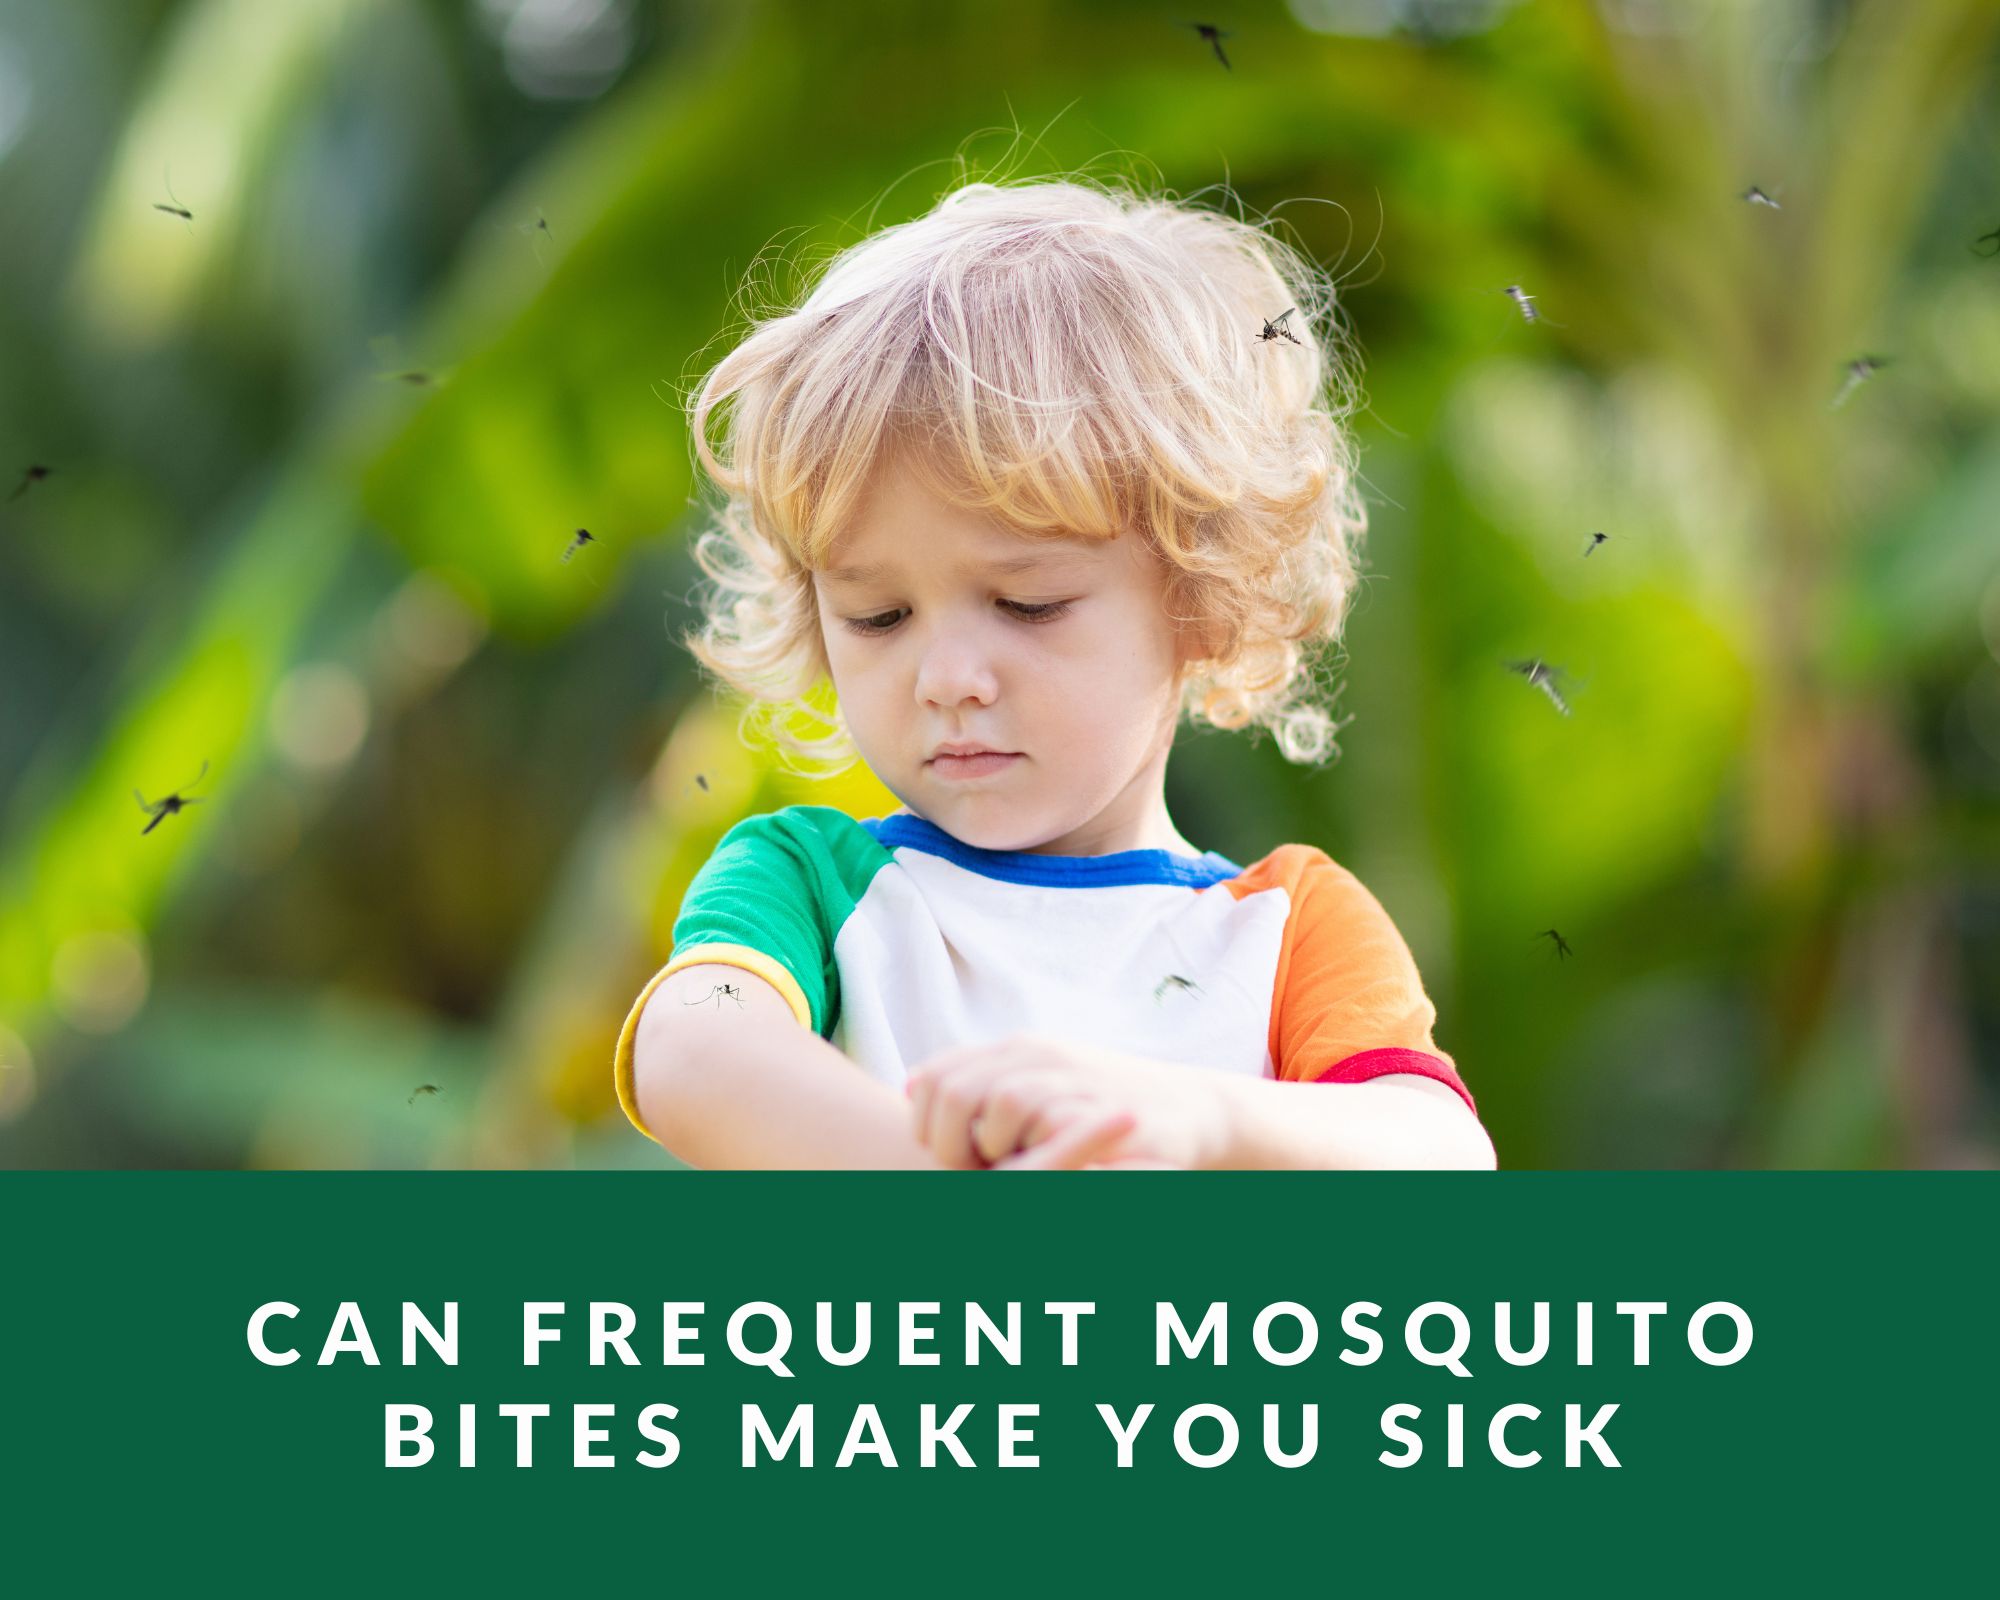 Can frequent mosquito bites make you sick